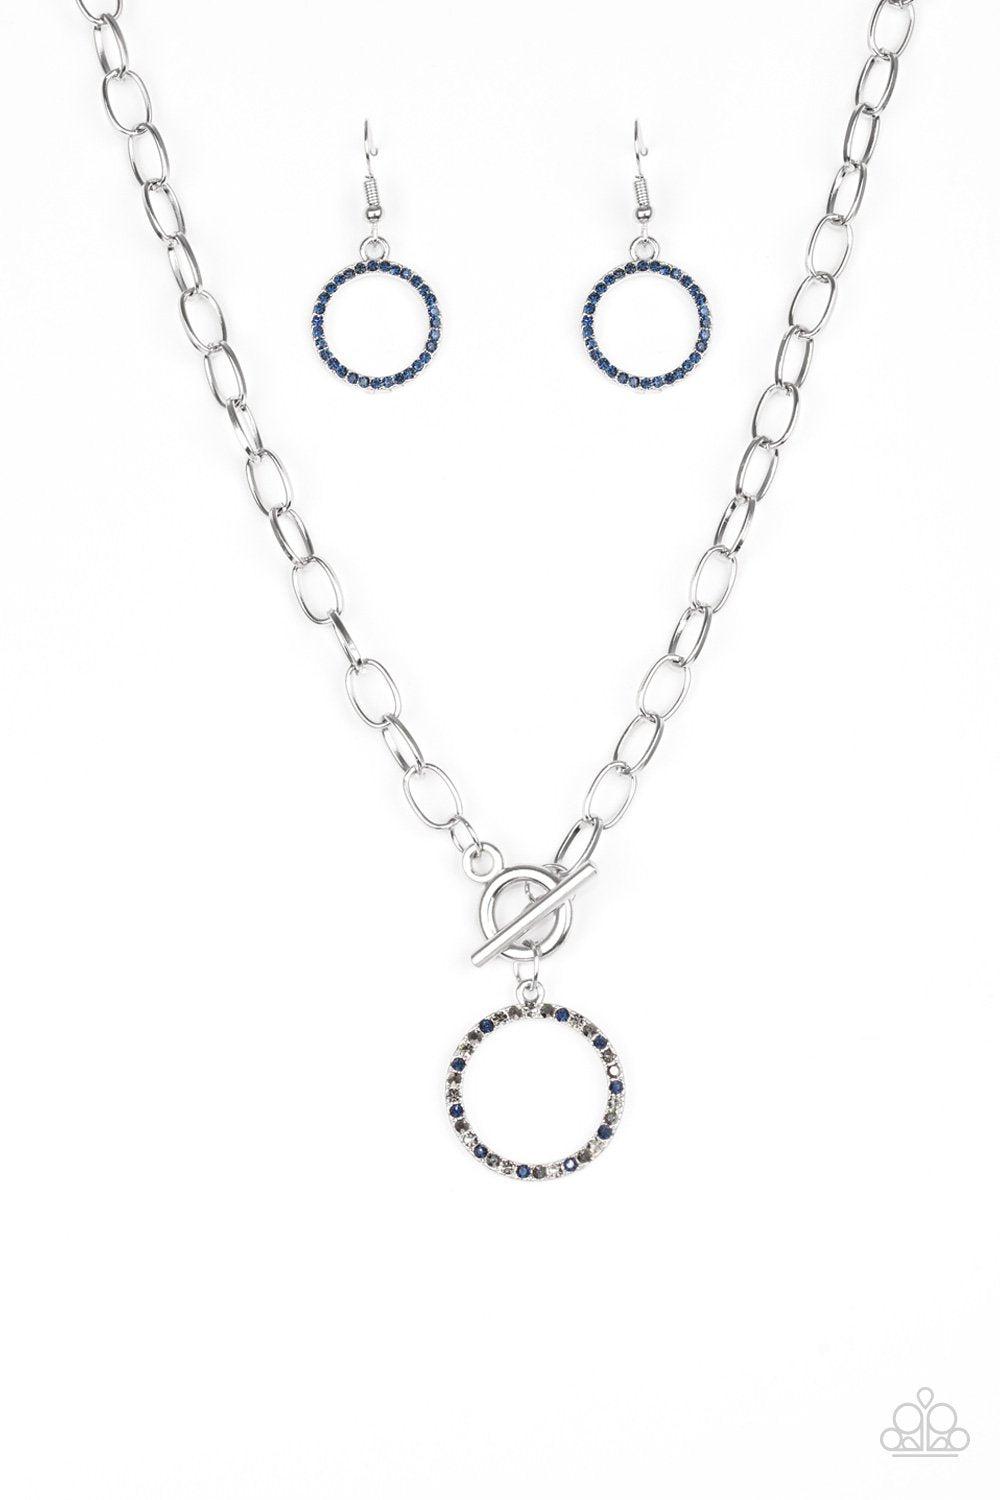 All in Favor Multi-color Blue and Grey Gem Necklace and matching Earrings - Paparazzi Accessories-CarasShop.com - $5 Jewelry by Cara Jewels